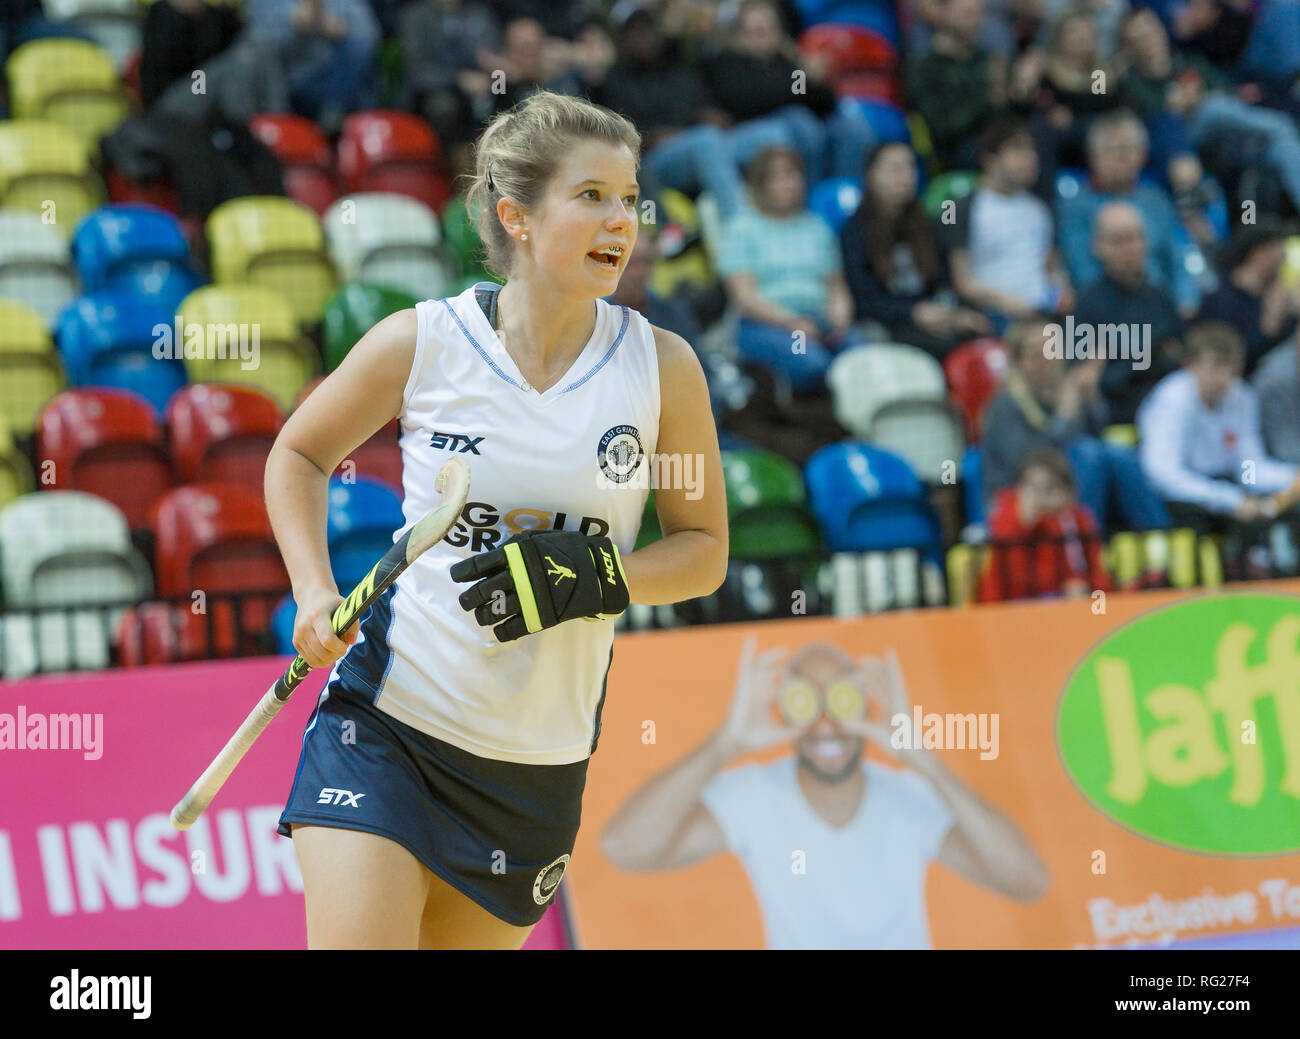 London, UK. 27th January 2019. Sophie Bray of East Grinstead  winners of the Womens Final  of the Jaffa Super 6s Finals 2019  at the Coppebox Arena. Trevor Holt / Alamy Credit: Trevor Holt/Alamy Live News Stock Photo